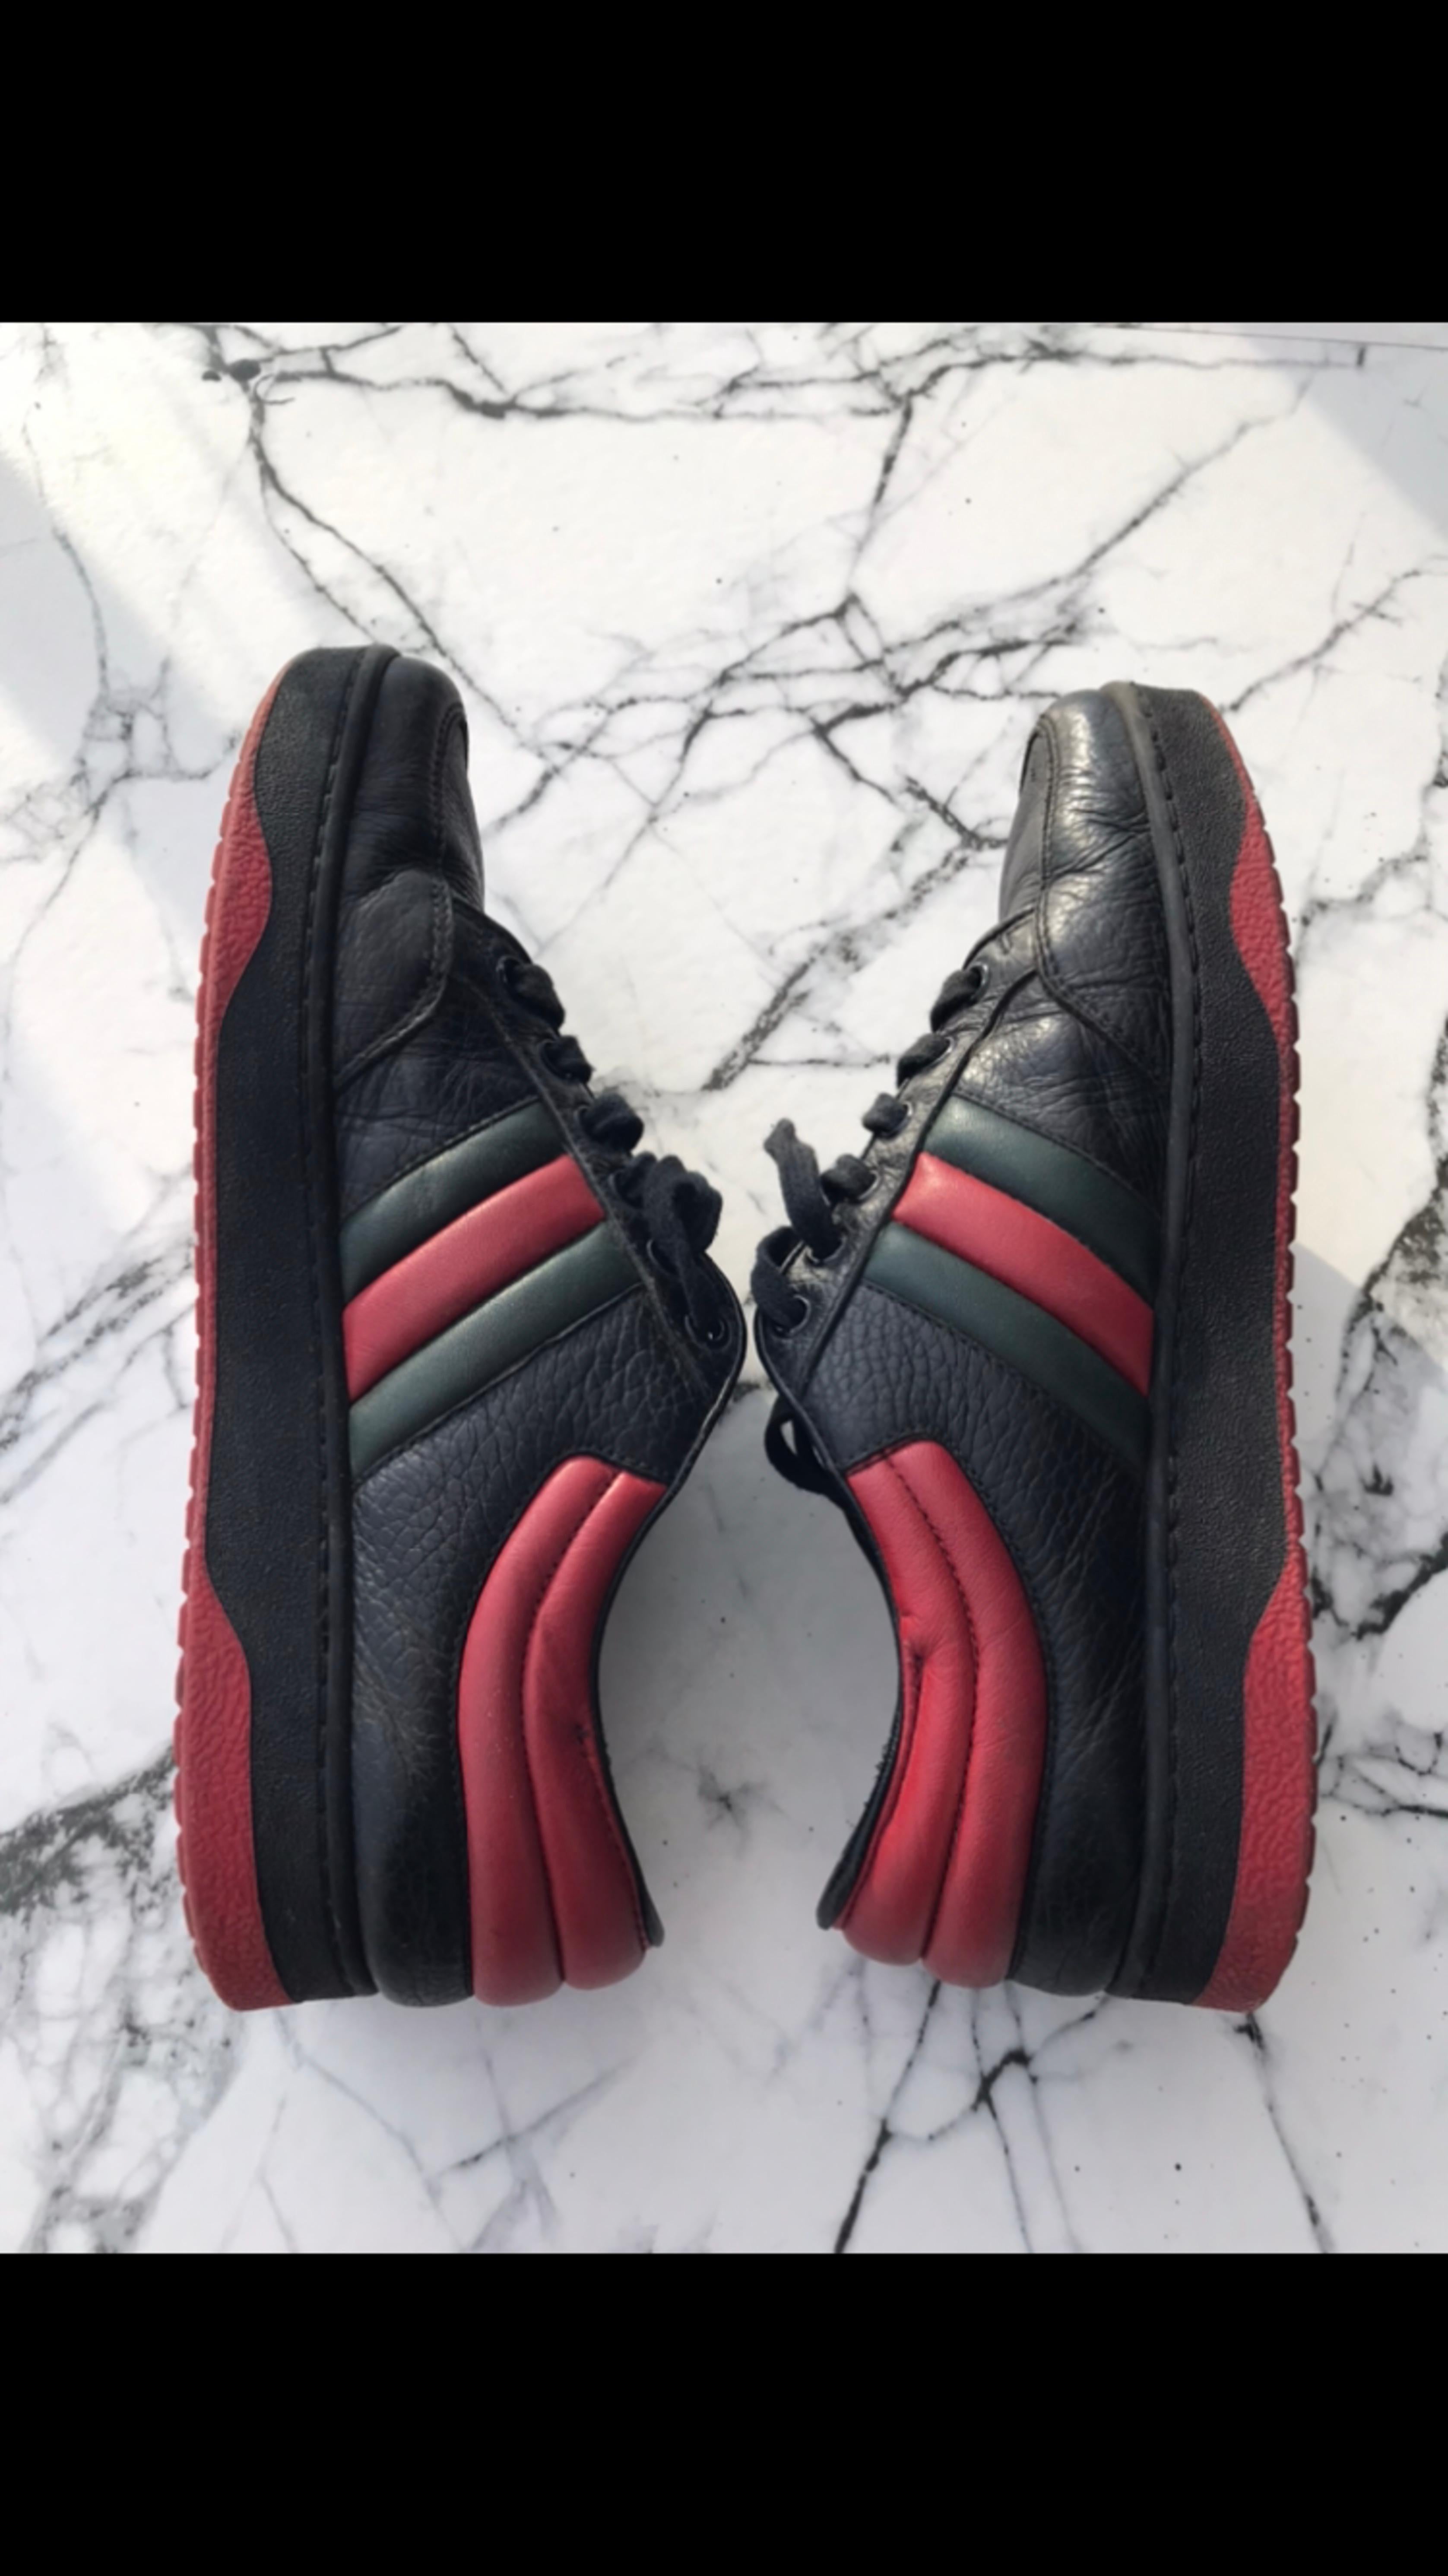 Black Gucci sneakers were previously used in size 7, black color of the product in the photo